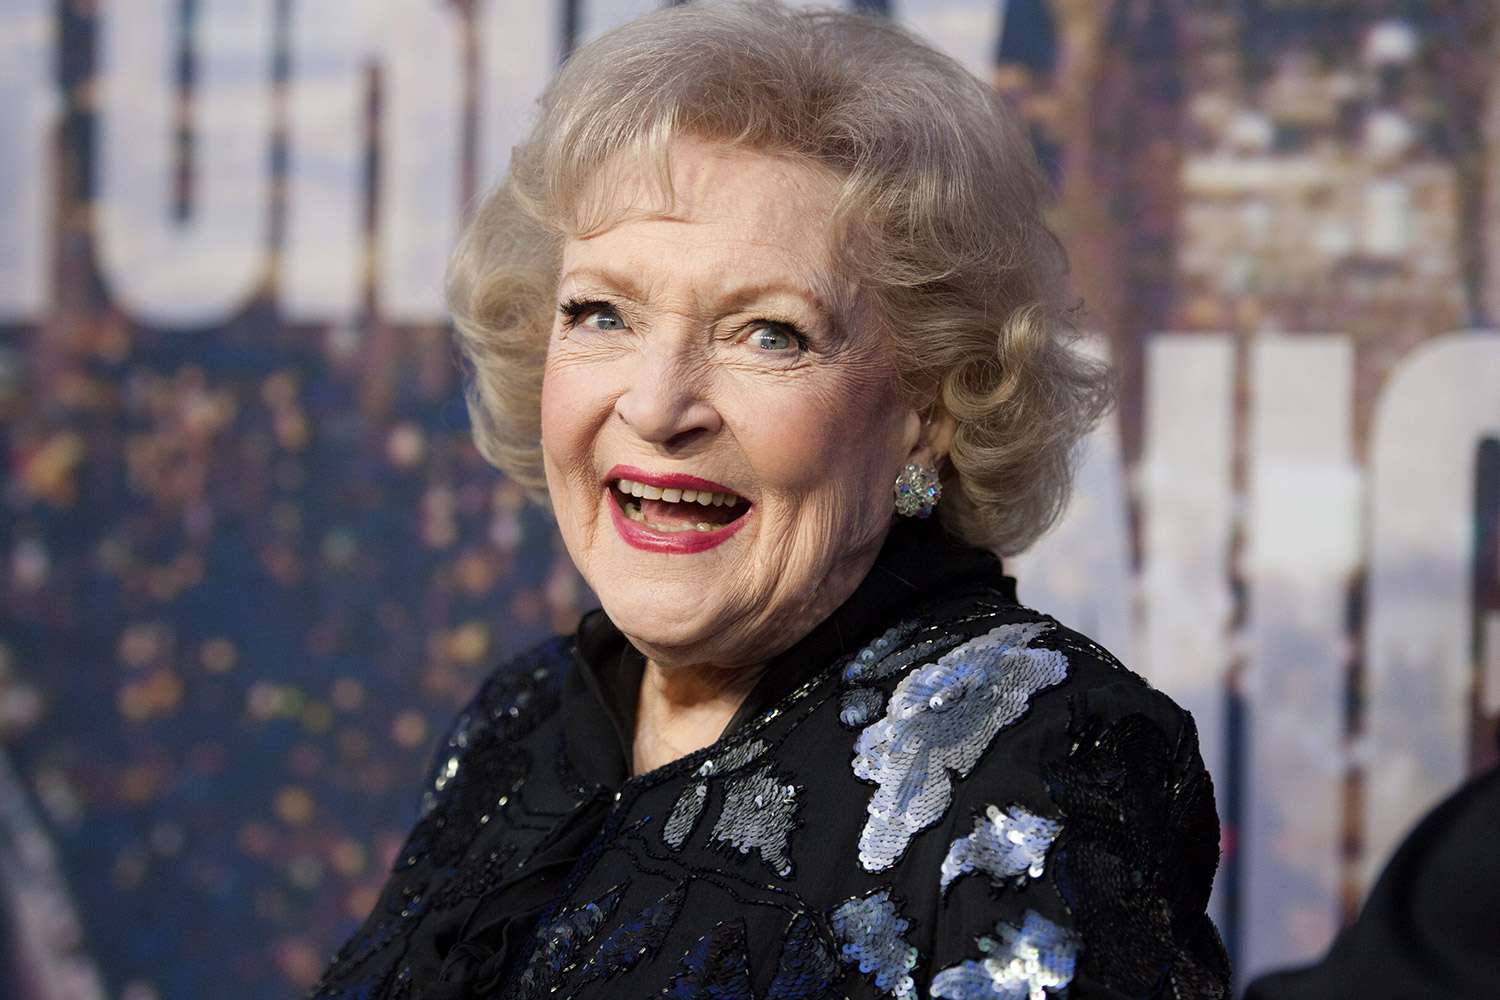 Betty White's Agent Says Funeral Arrangements Being Handled Privately: 'She Never Wanted People to Make a Fuss'